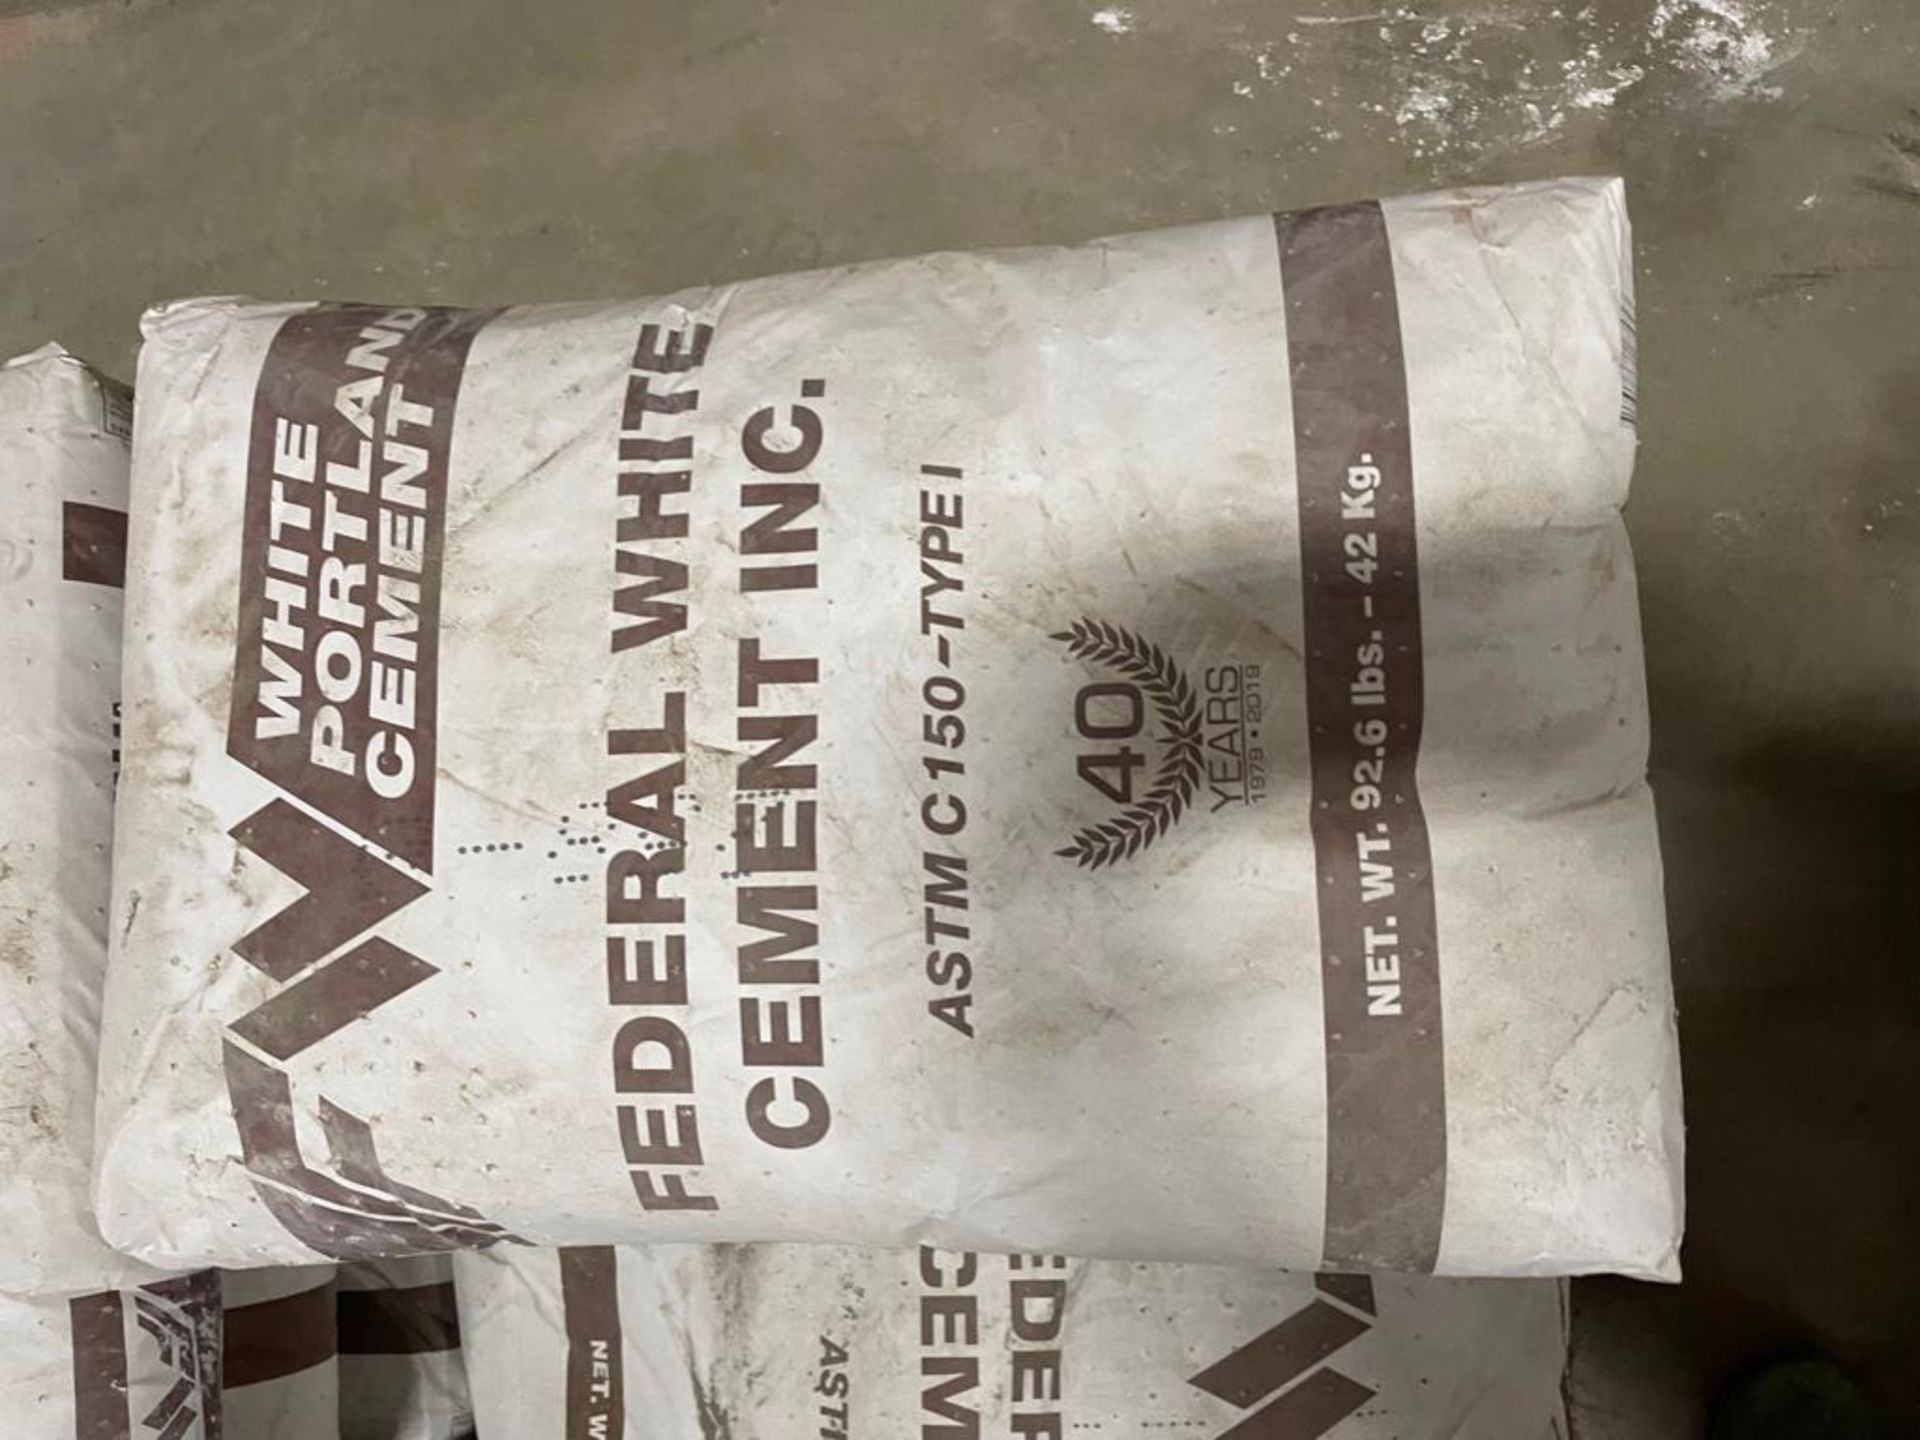 Pallet of Federal White Cement & Rainer Portland Cement Type 1. Located in Hazelwood, MO - Image 5 of 5